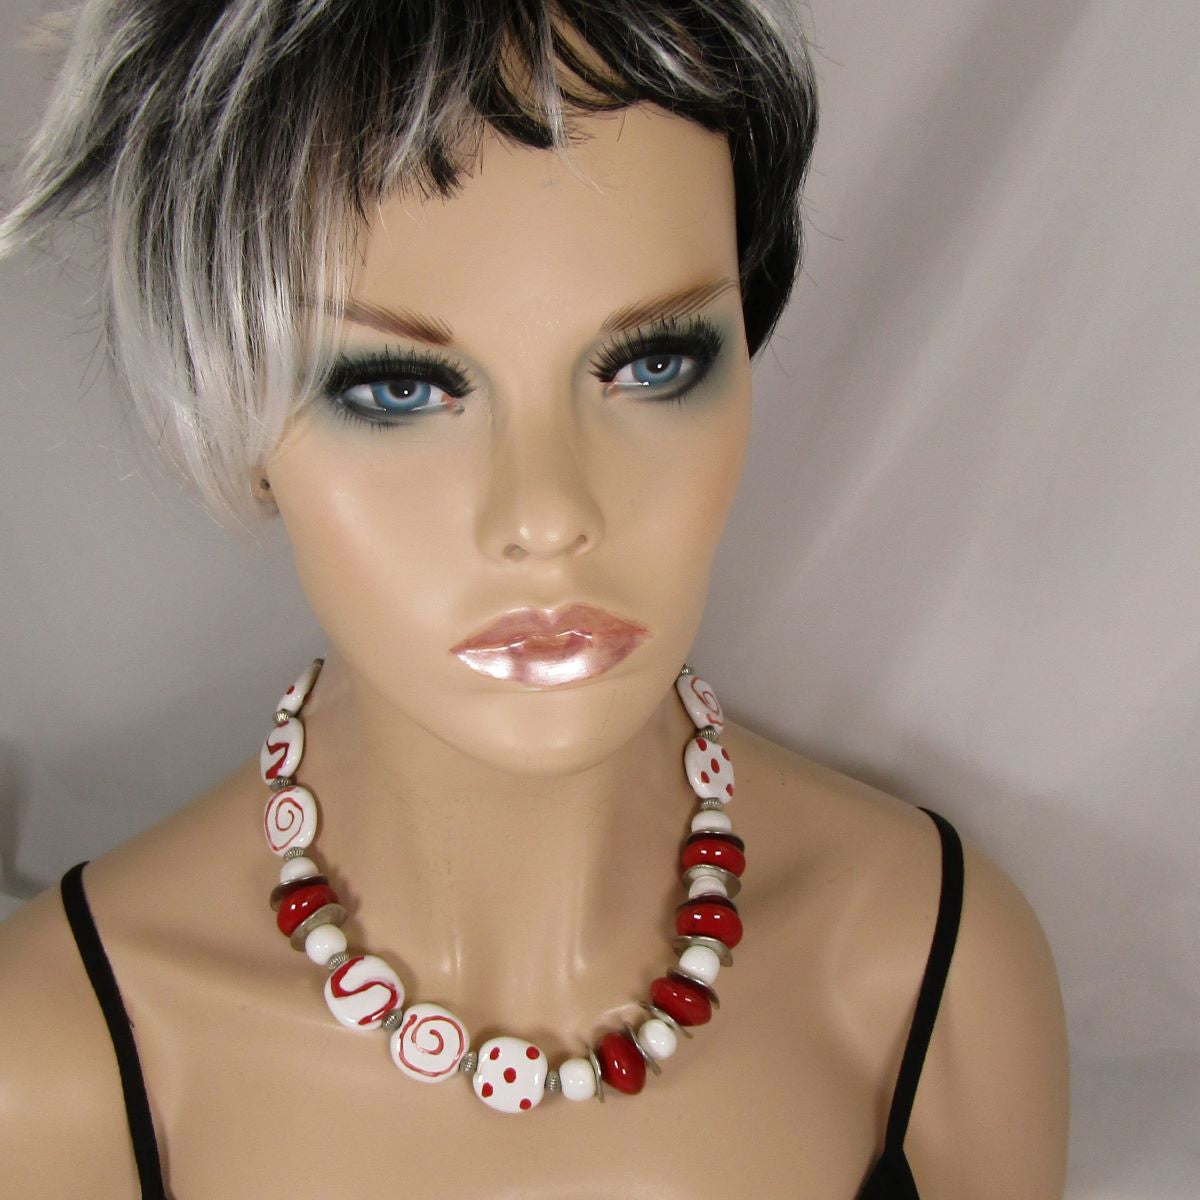 White Kazuri Necklace in Red and White Fair Trade Beads - VP's Jewelry